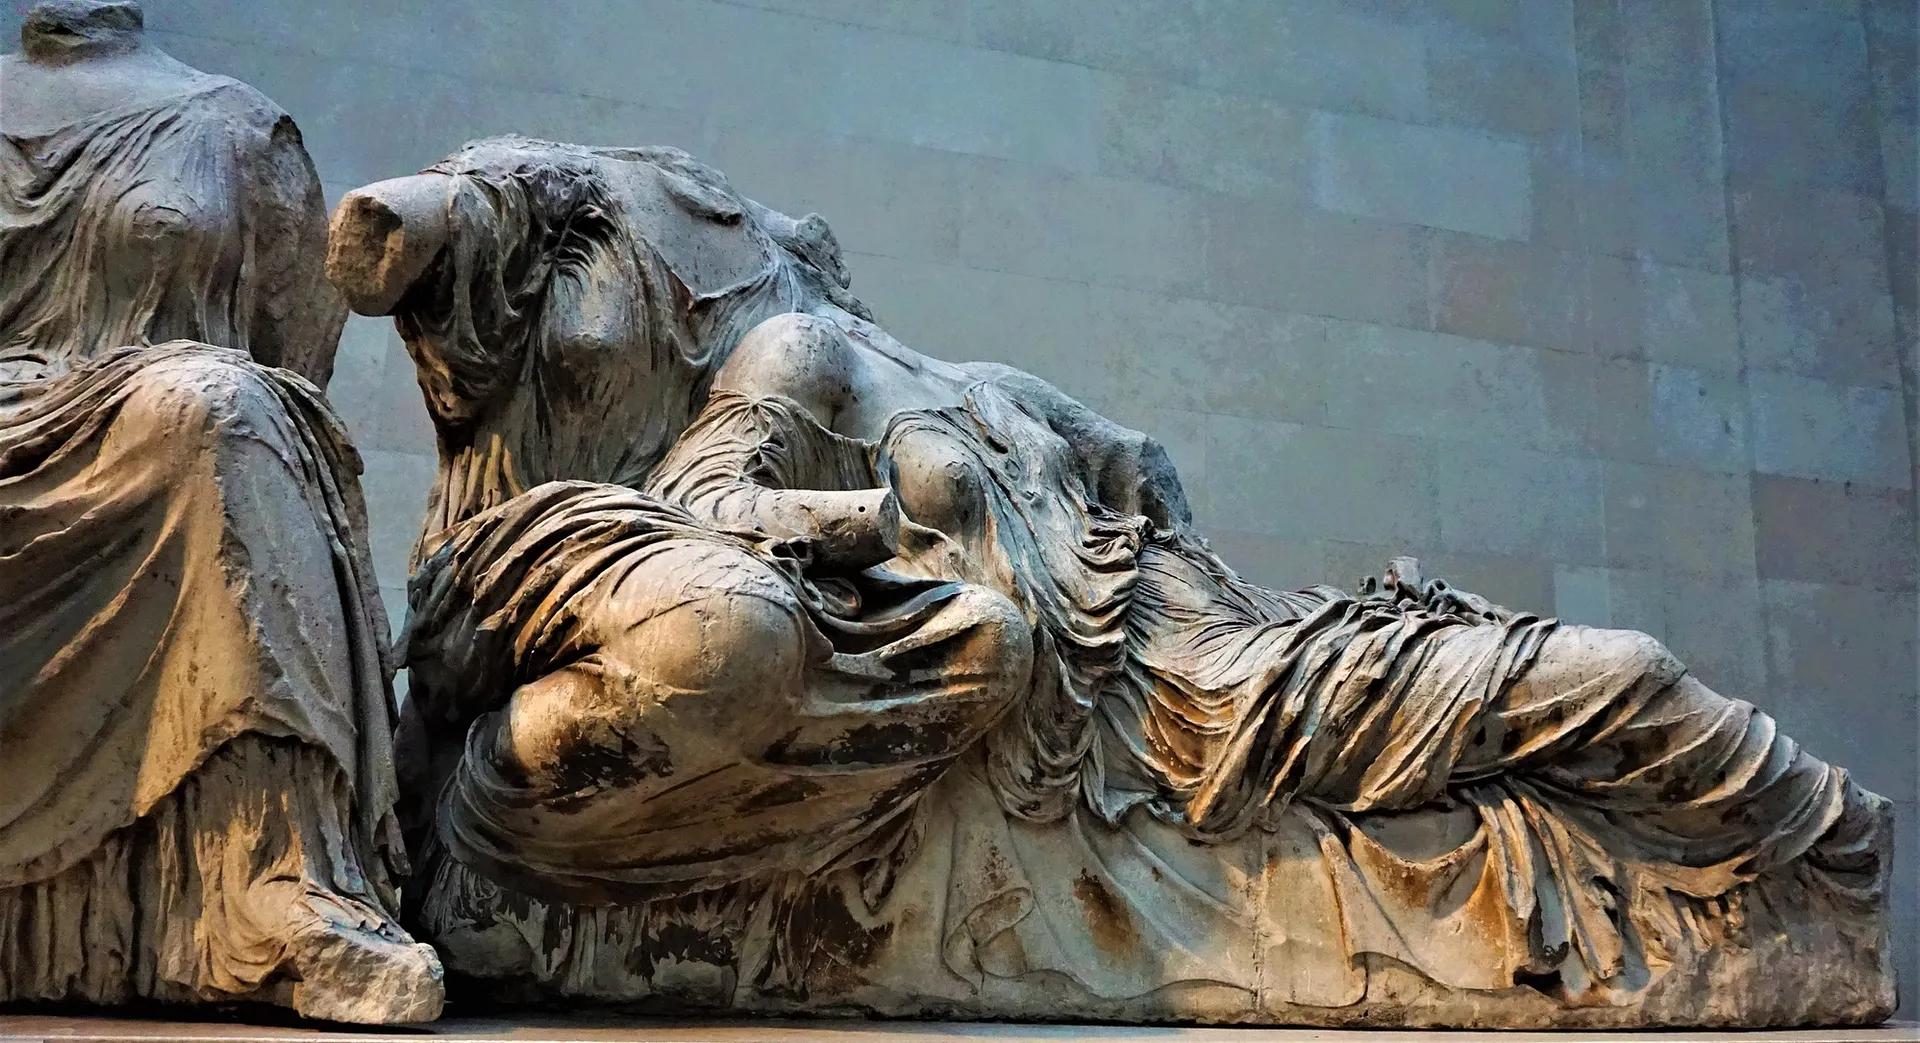 The Parthenon Sculptures in the Duveen Gallery at London's British Museum Photo: Joyofmuseums